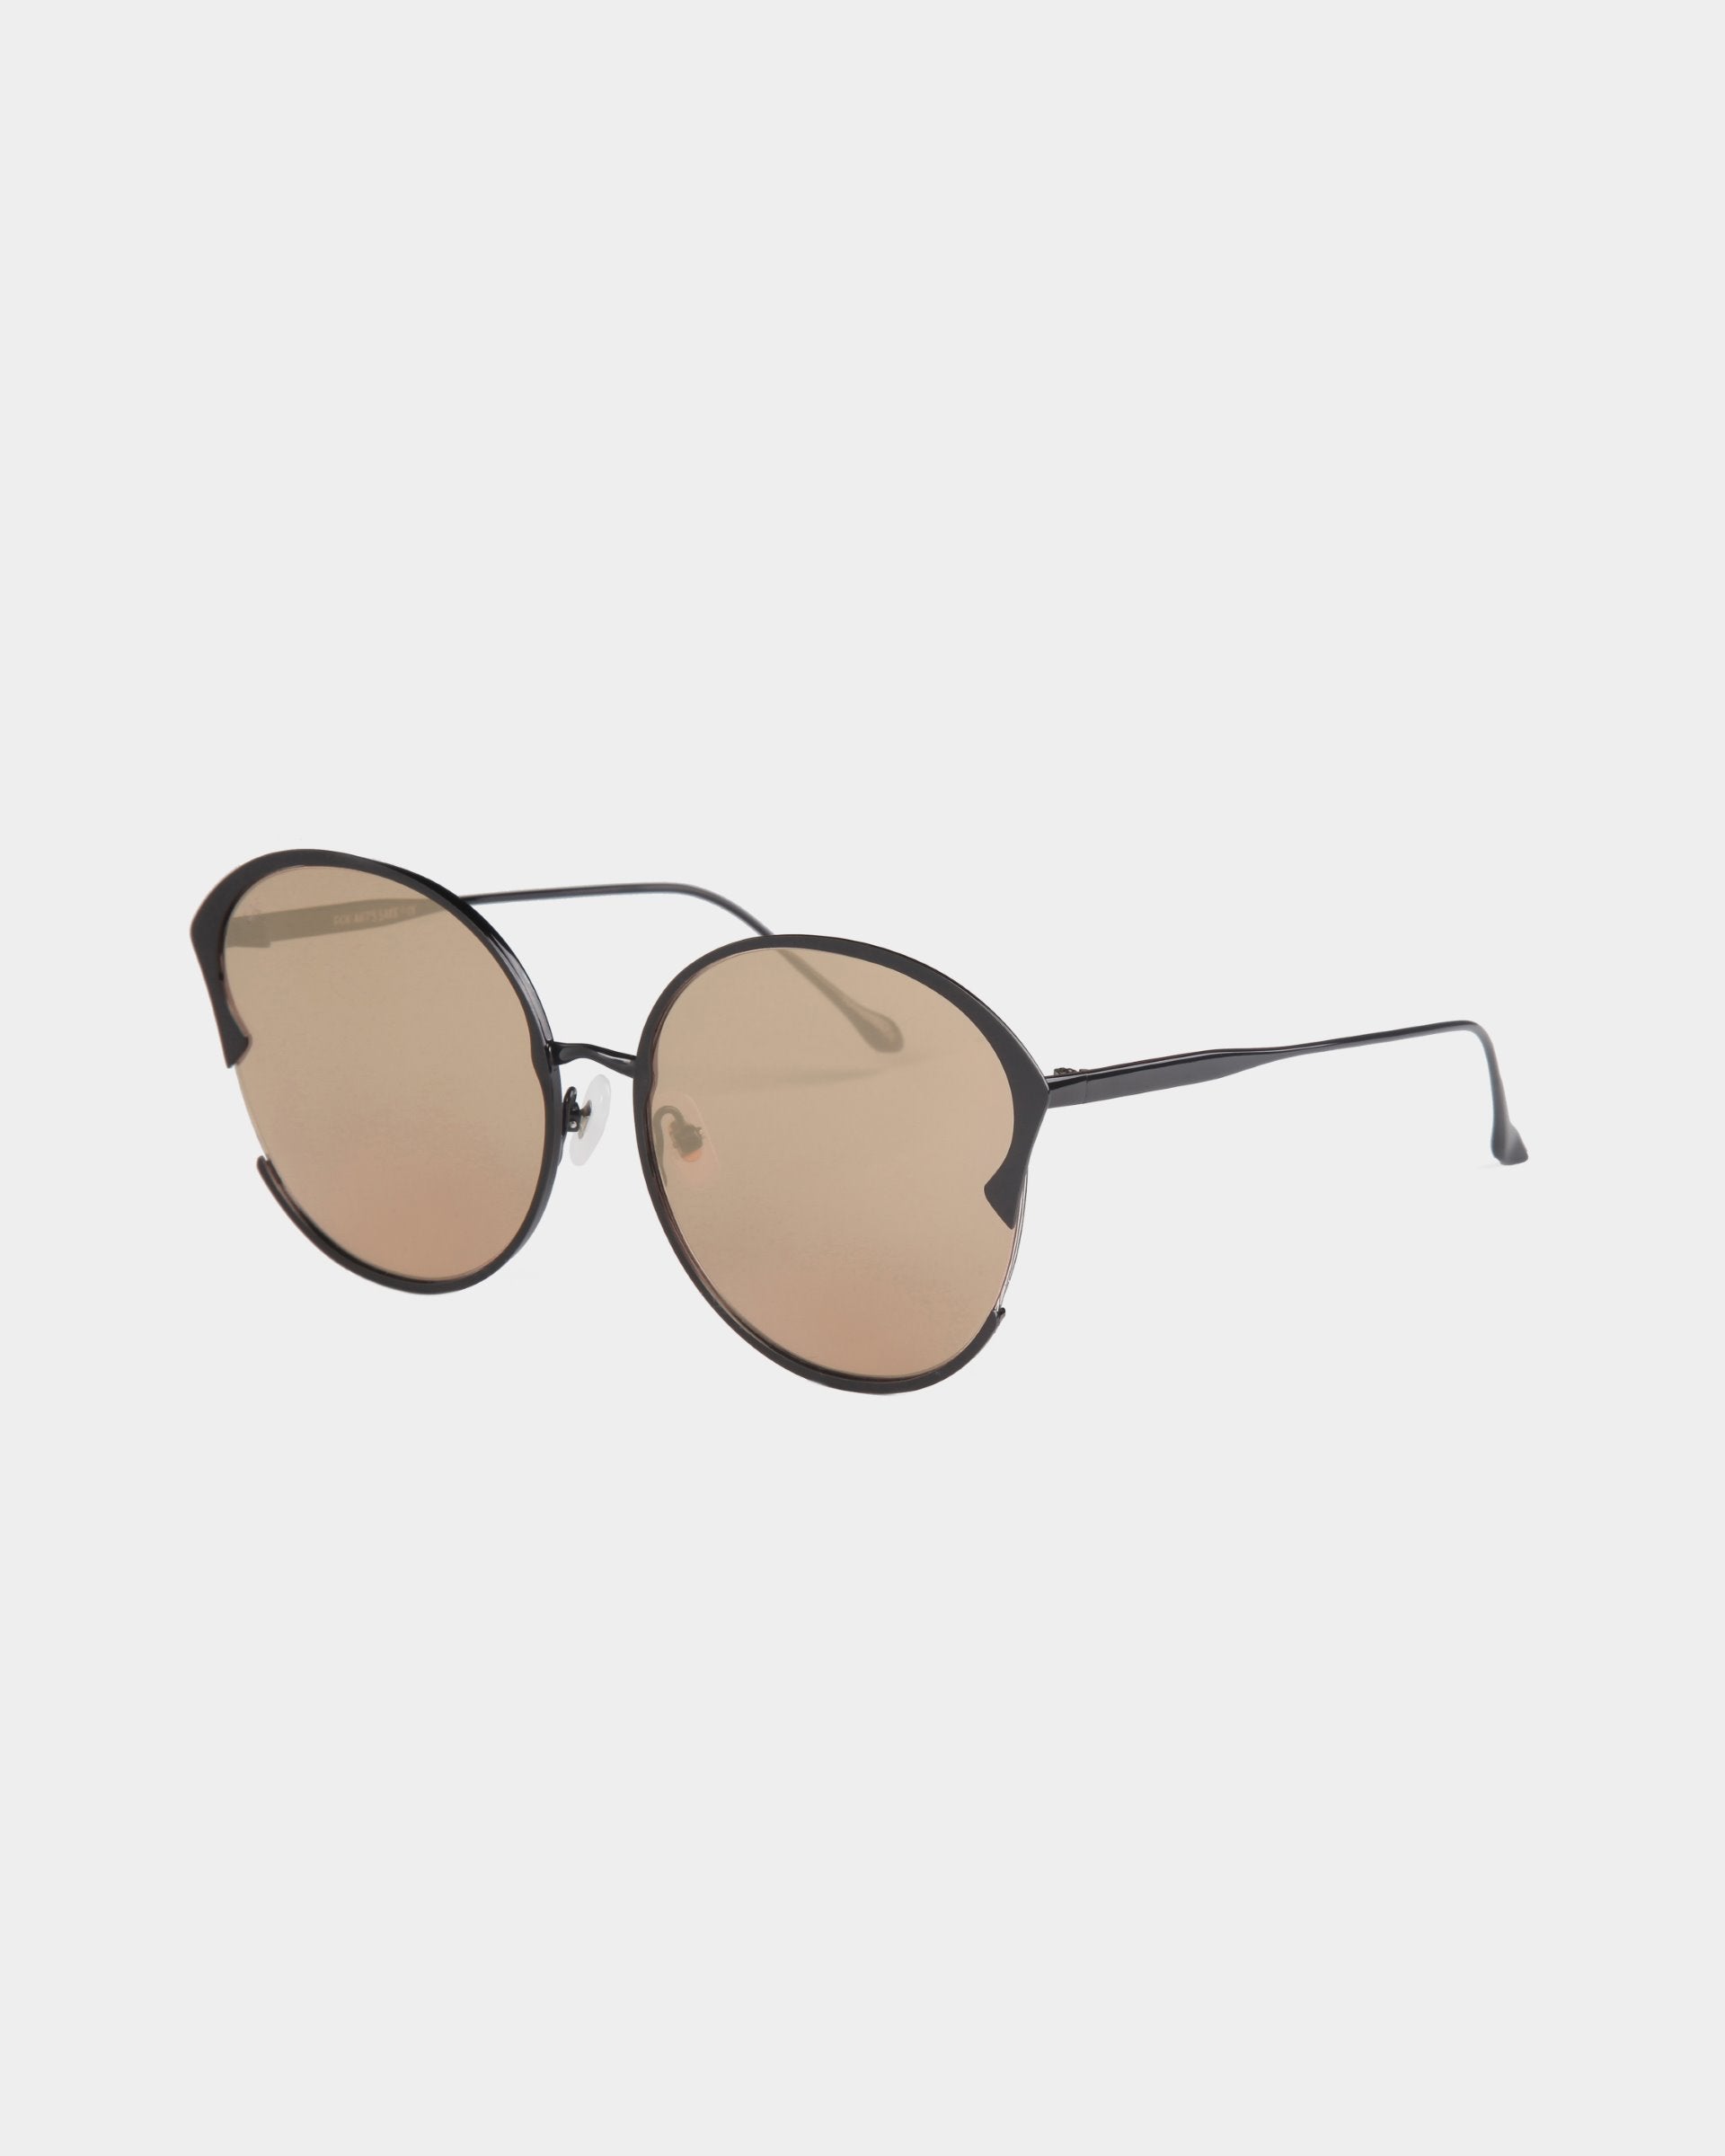 A pair of stylish For Art&#39;s Sake® Alectrona sunglasses with round brown-tinted, shatter-resistant lenses and a thin black metal frame. The design features a minimalist bridge and temple arms, with adjustable jade nose pads for comfort. The background is plain white.